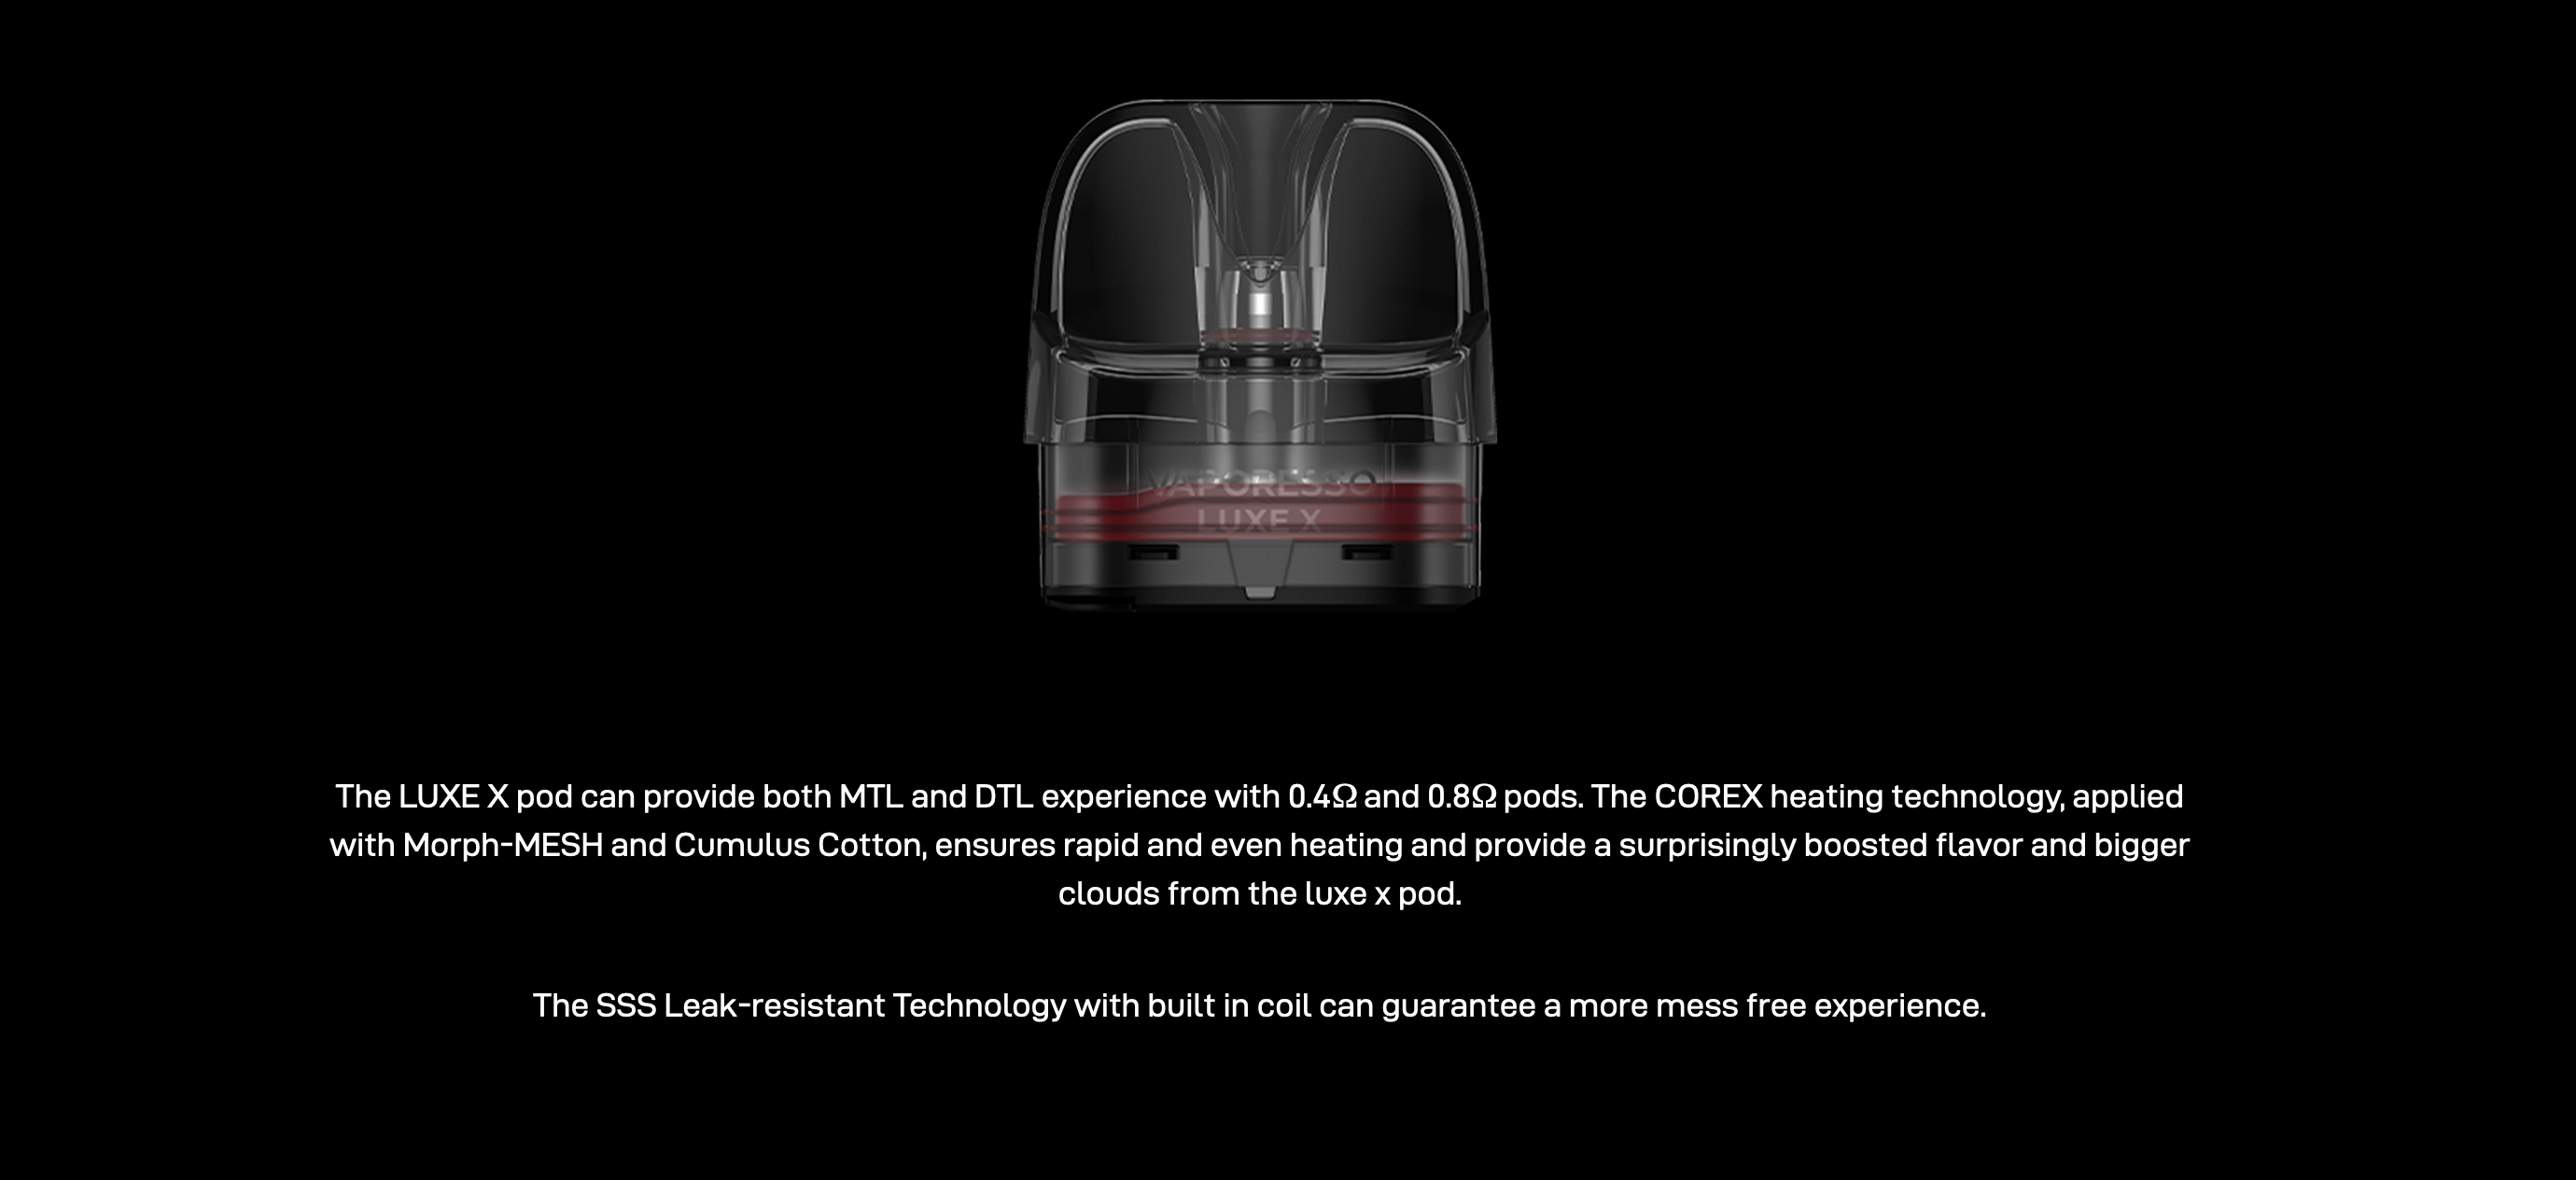 Vaporesso Luxe X Pods - capable of both MTL and DTL vaping